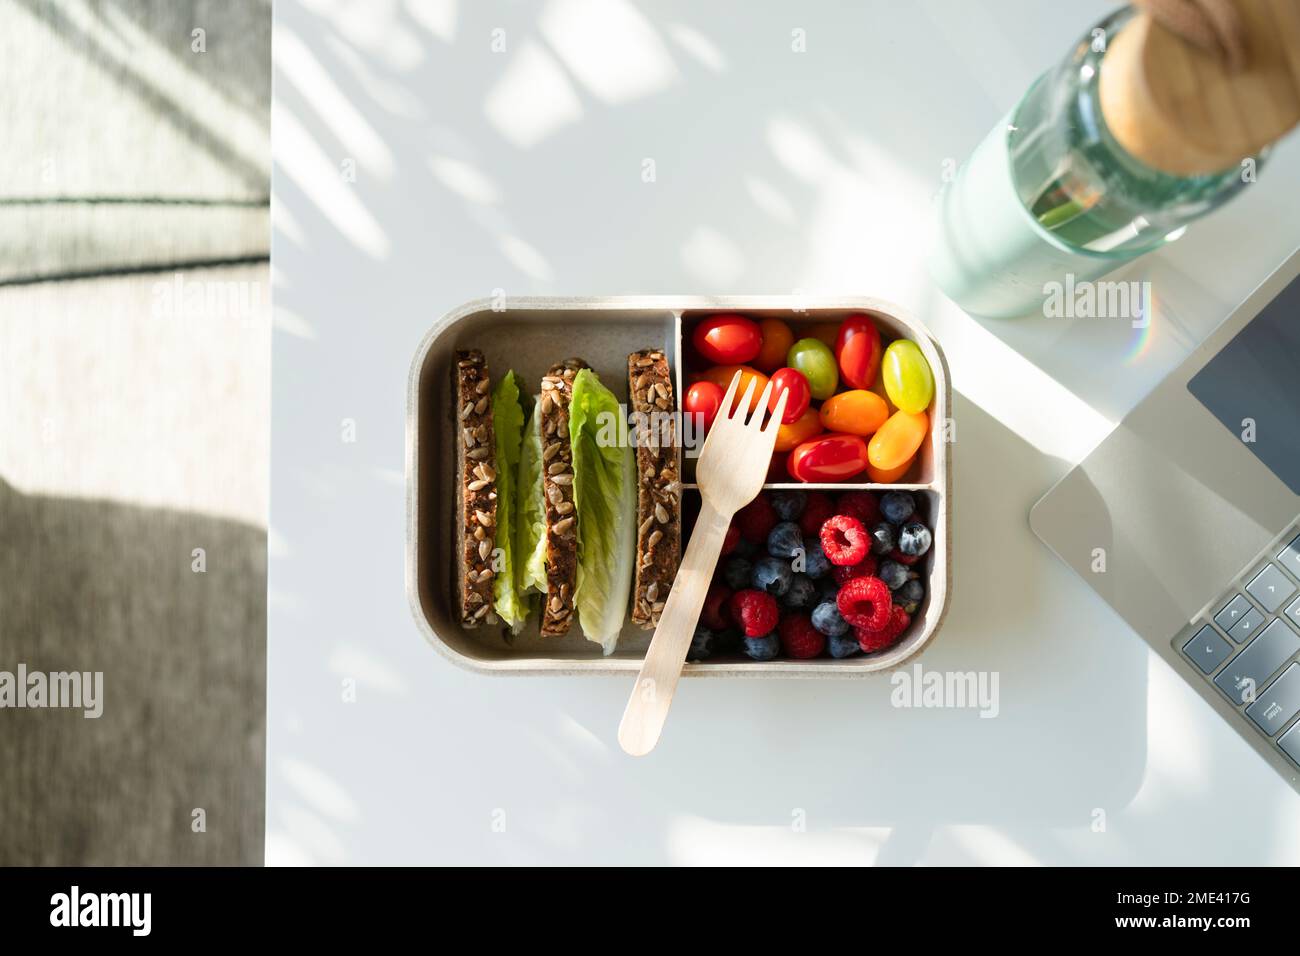 Rye bread, berries and salad with disposable fork in lunch box on table Stock Photo